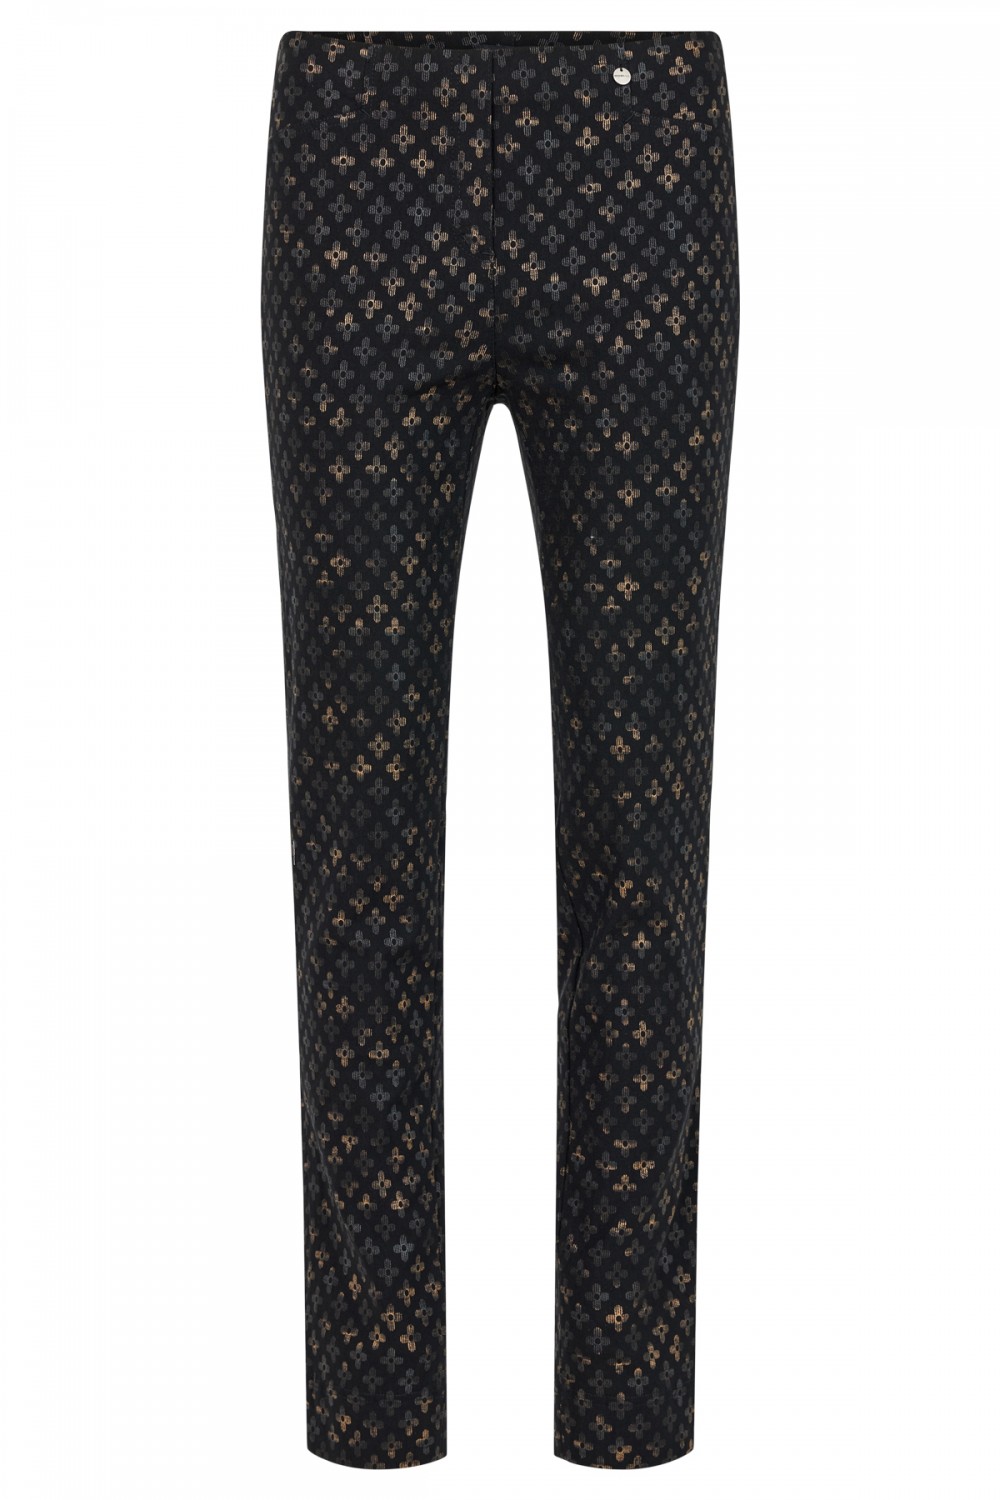 Robell Trousers Rose 09 Limited Edition Flower Check Black